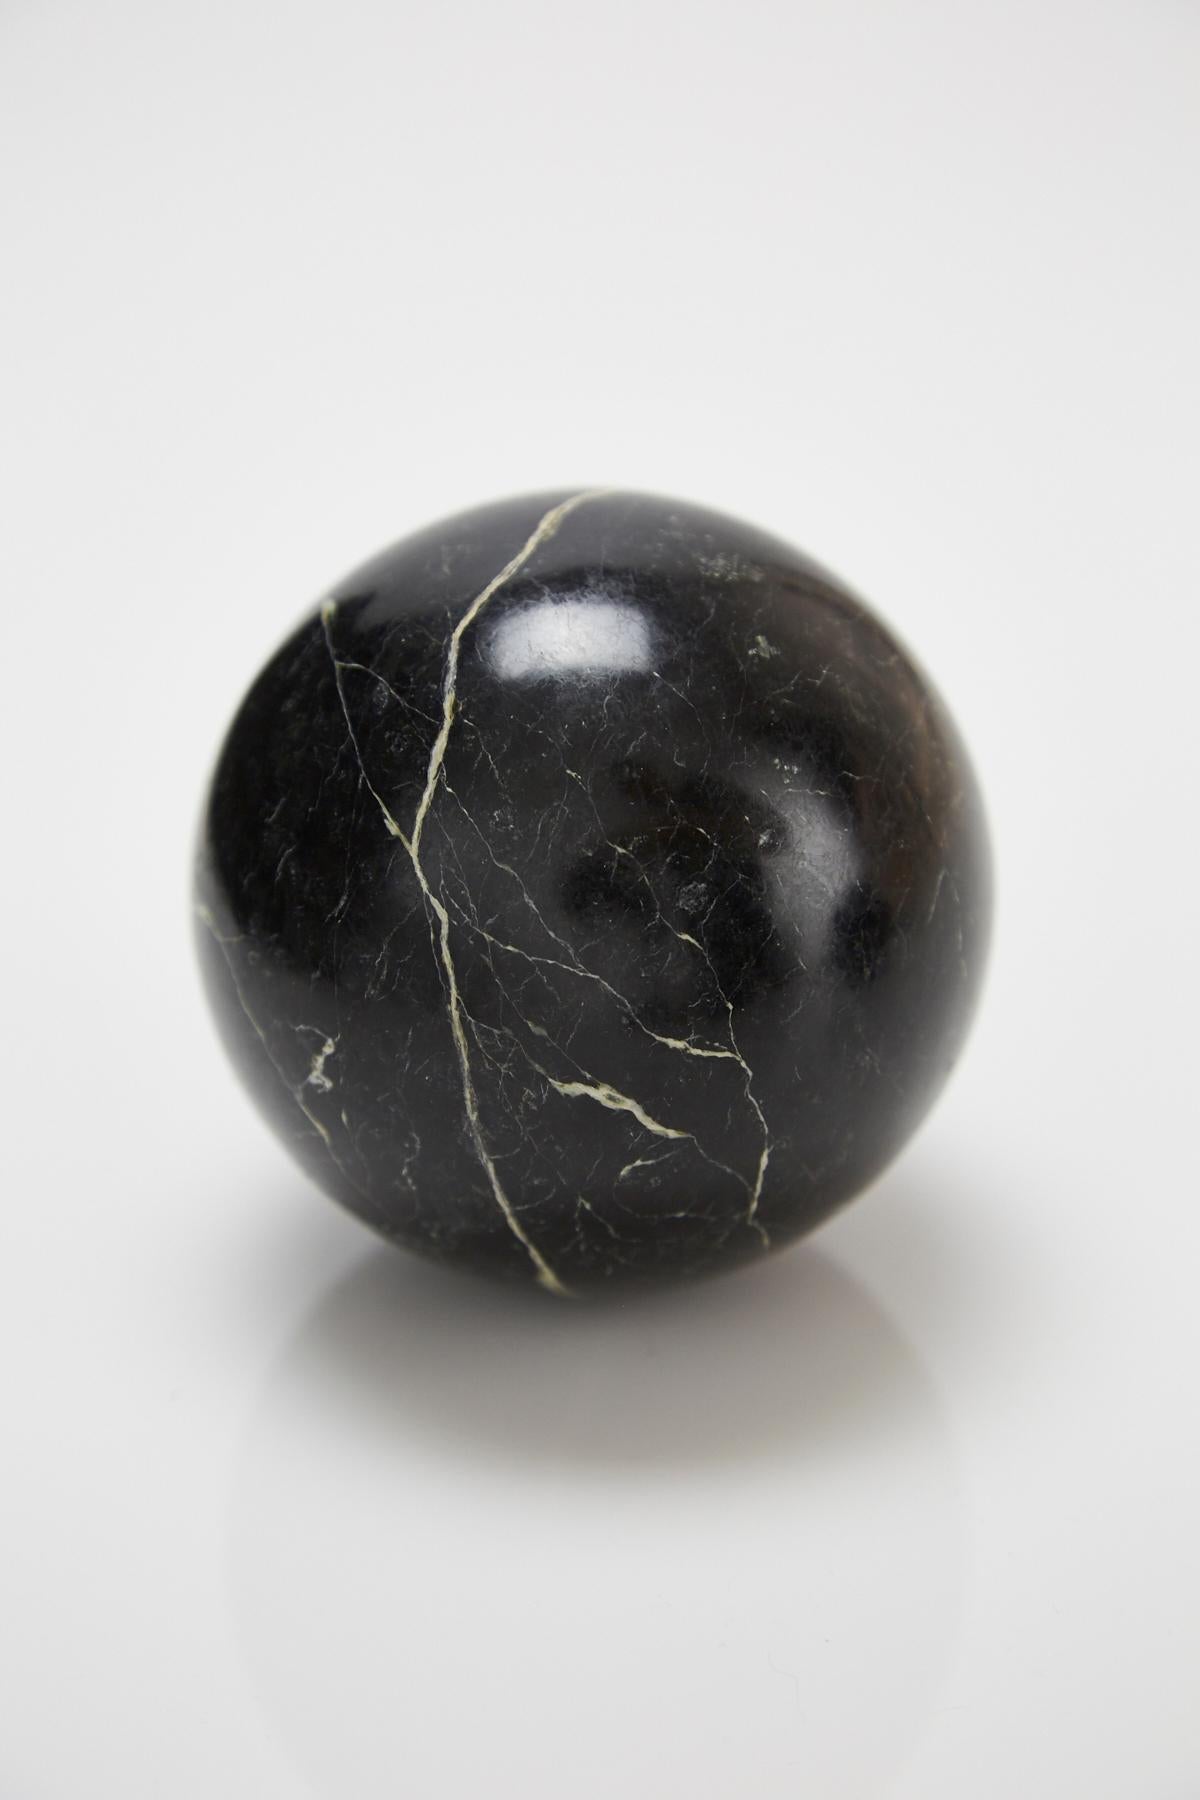 Extra small decorative sphere measuring 3.5 in. diameter. Solid black stone sphere with flattened end for balance.